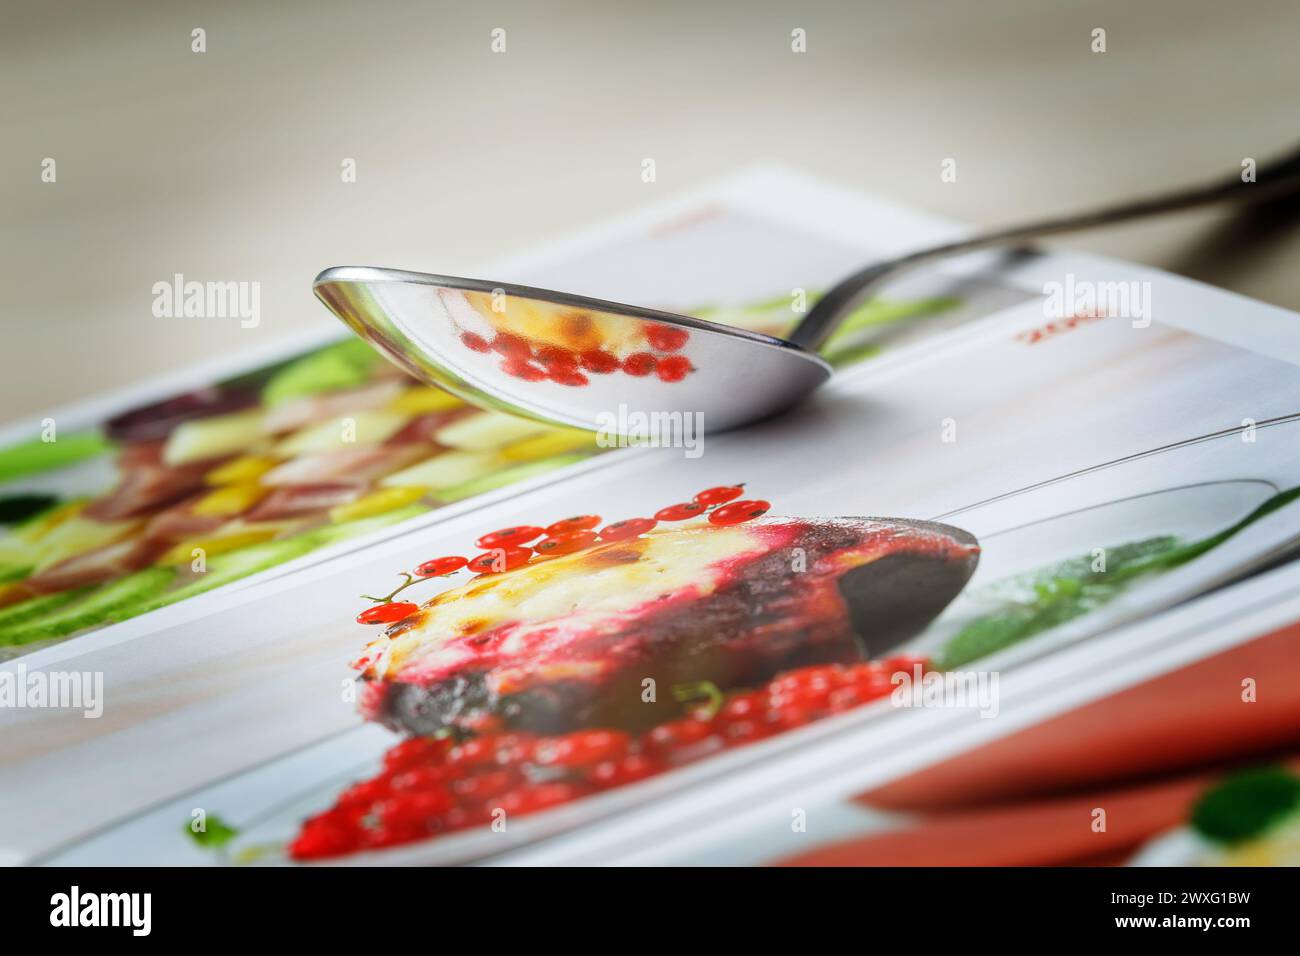 The spoon lying on the cookbook reflects a picture from a recipe with red berries. Stock Photo